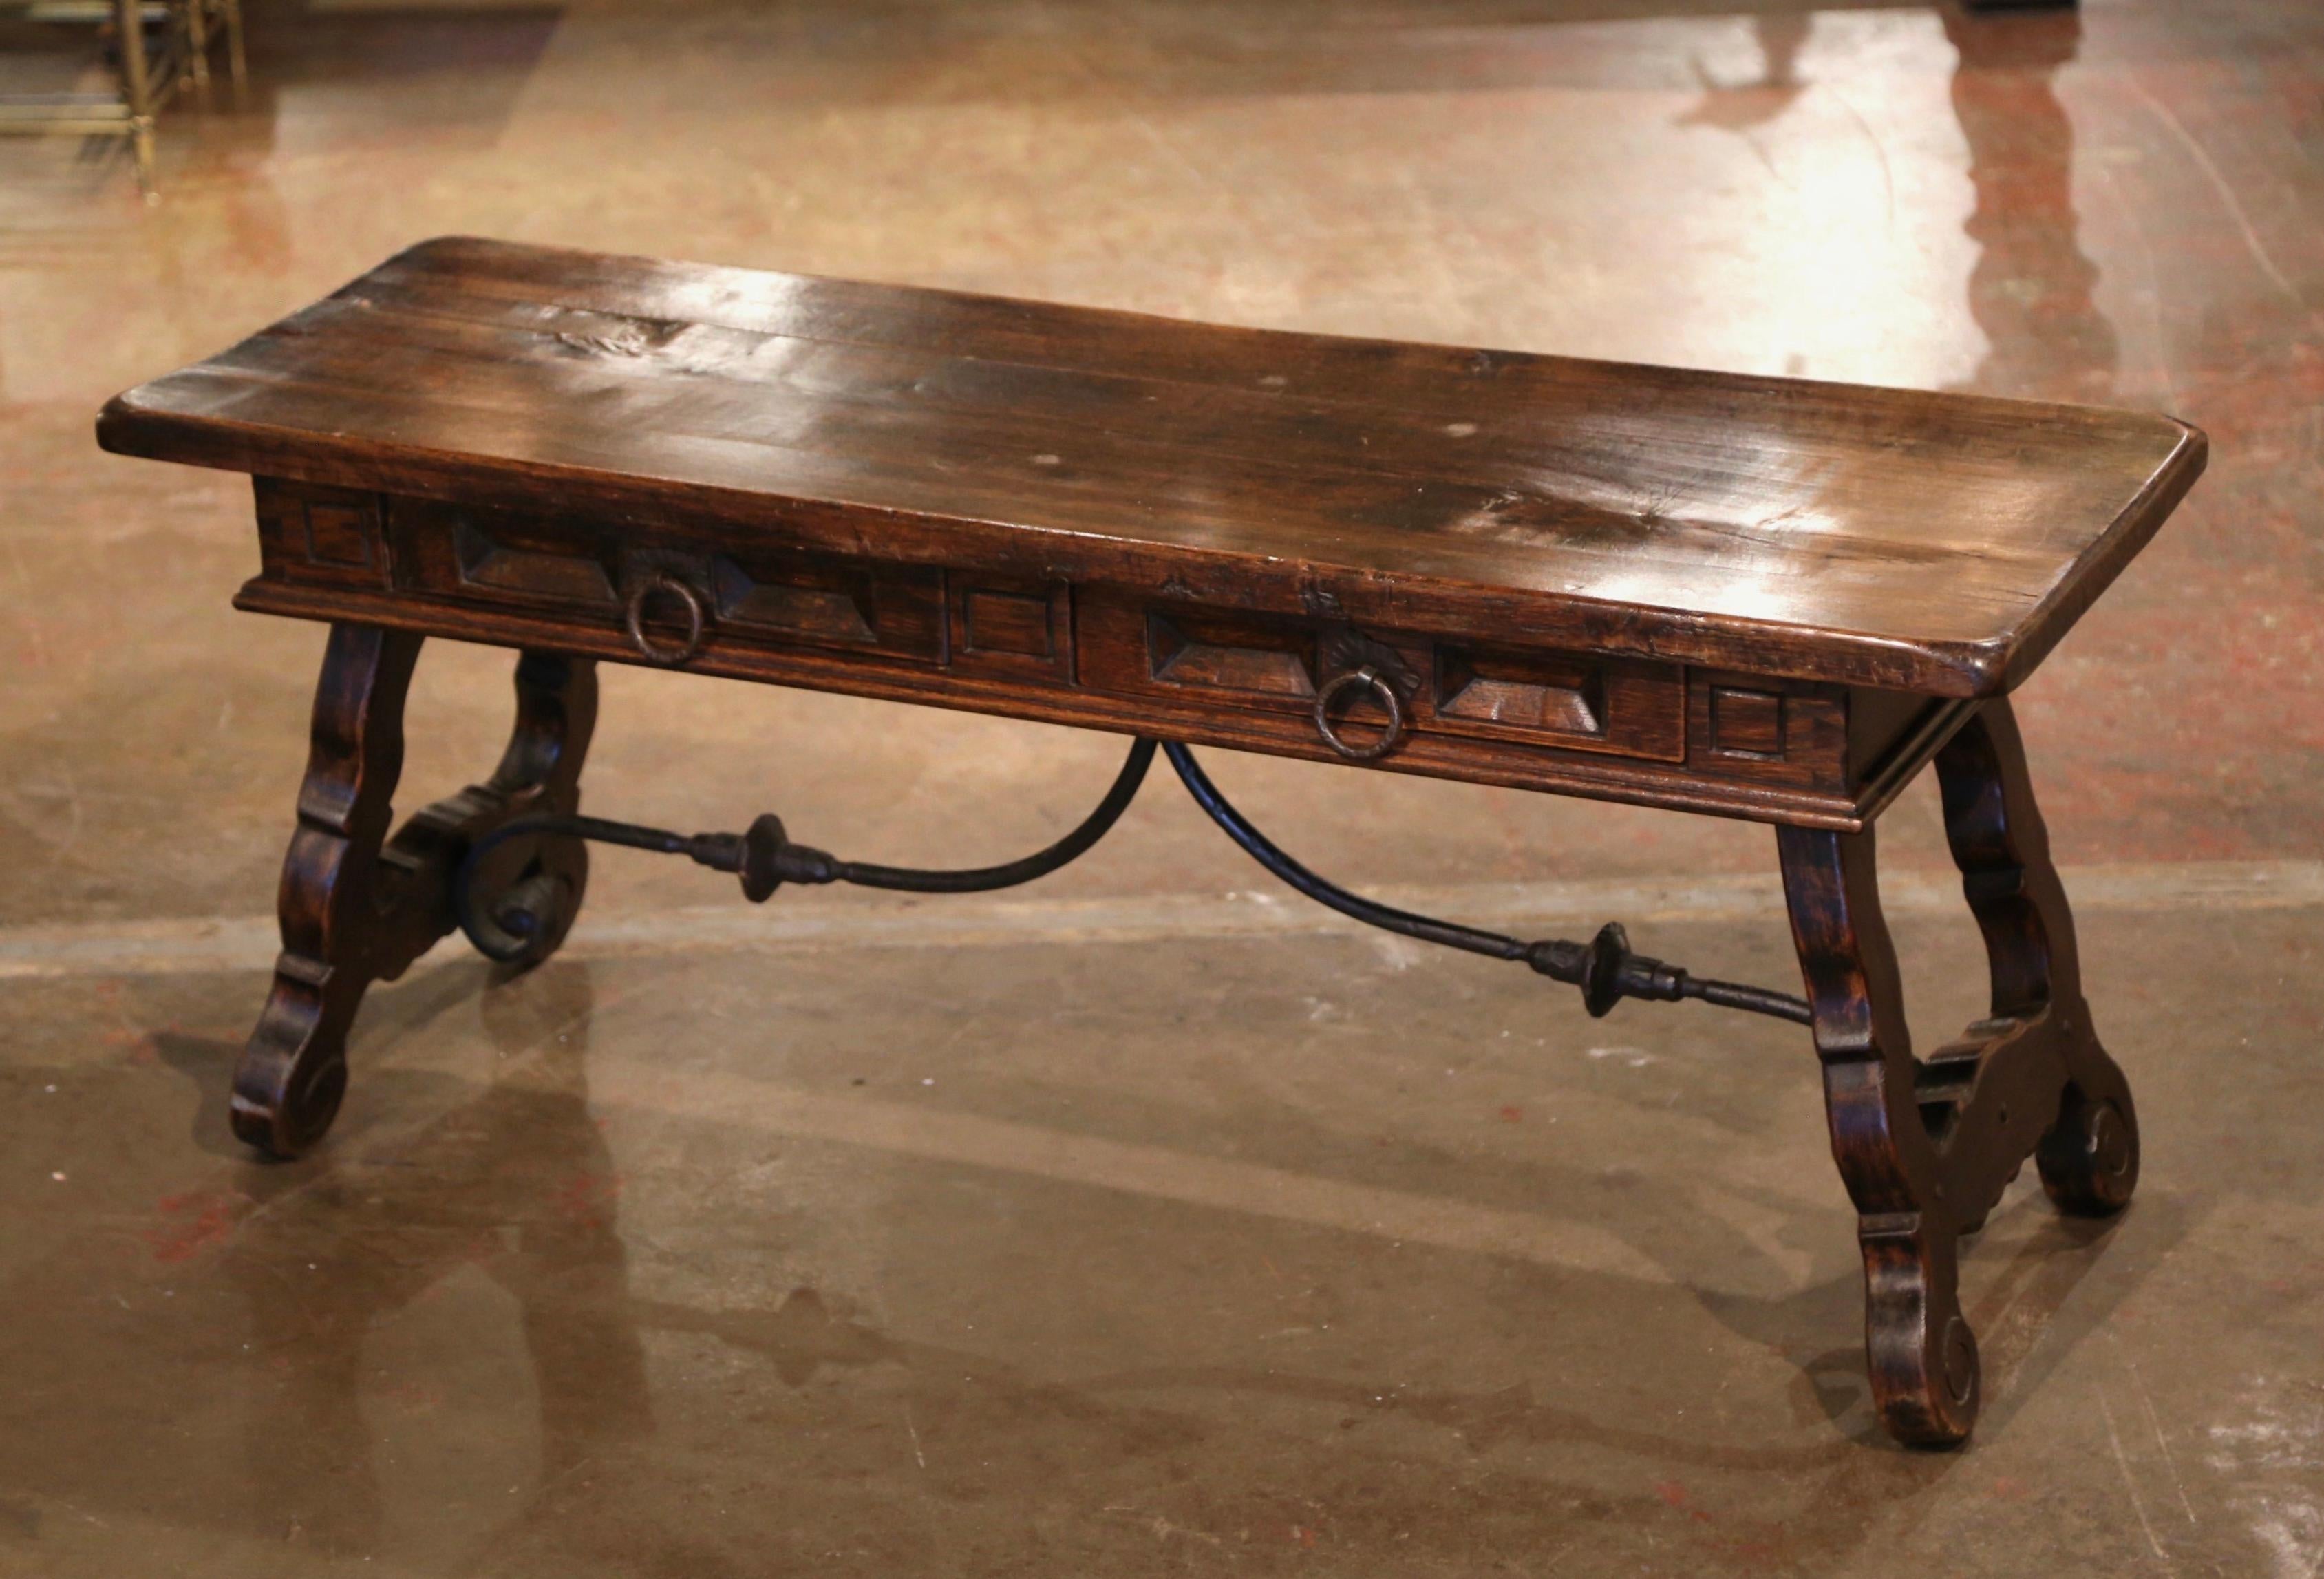 Crafted in Spain circa 1950, the rectangular antique fruit wood trestle coffee table stands on carved scrolled legs joined together with a forged iron stretcher over two drawers dressed with iron pulls; the top features rounded edges and corners.